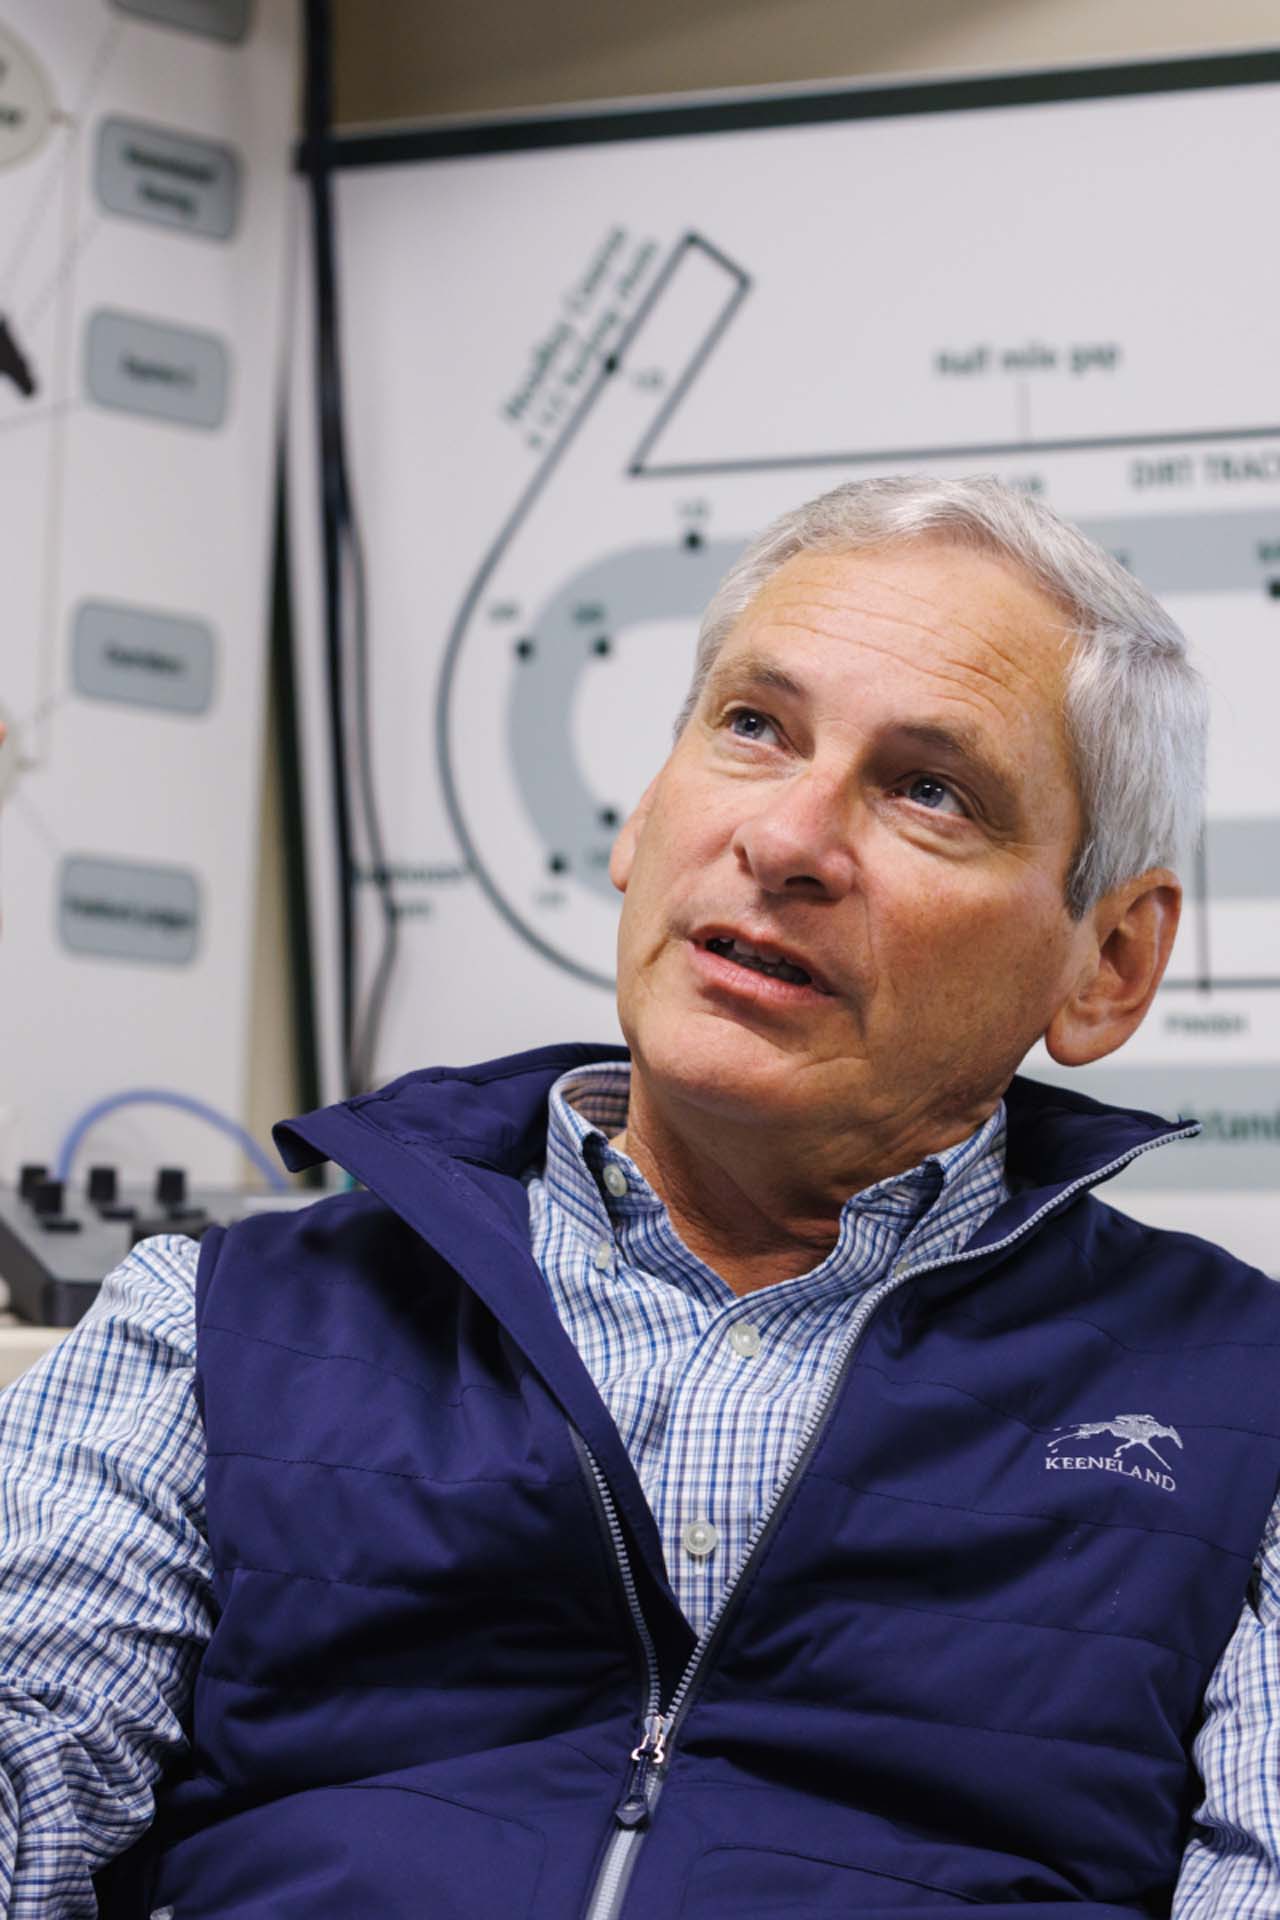 An up-close photo of Dr. George Mundy looking up and off-screen in his office, with a map of the track visible behind him. He is an older White man with short silver hair. He is wearing a navy Keeneland-brand vest over a white and blue checkered shirt.